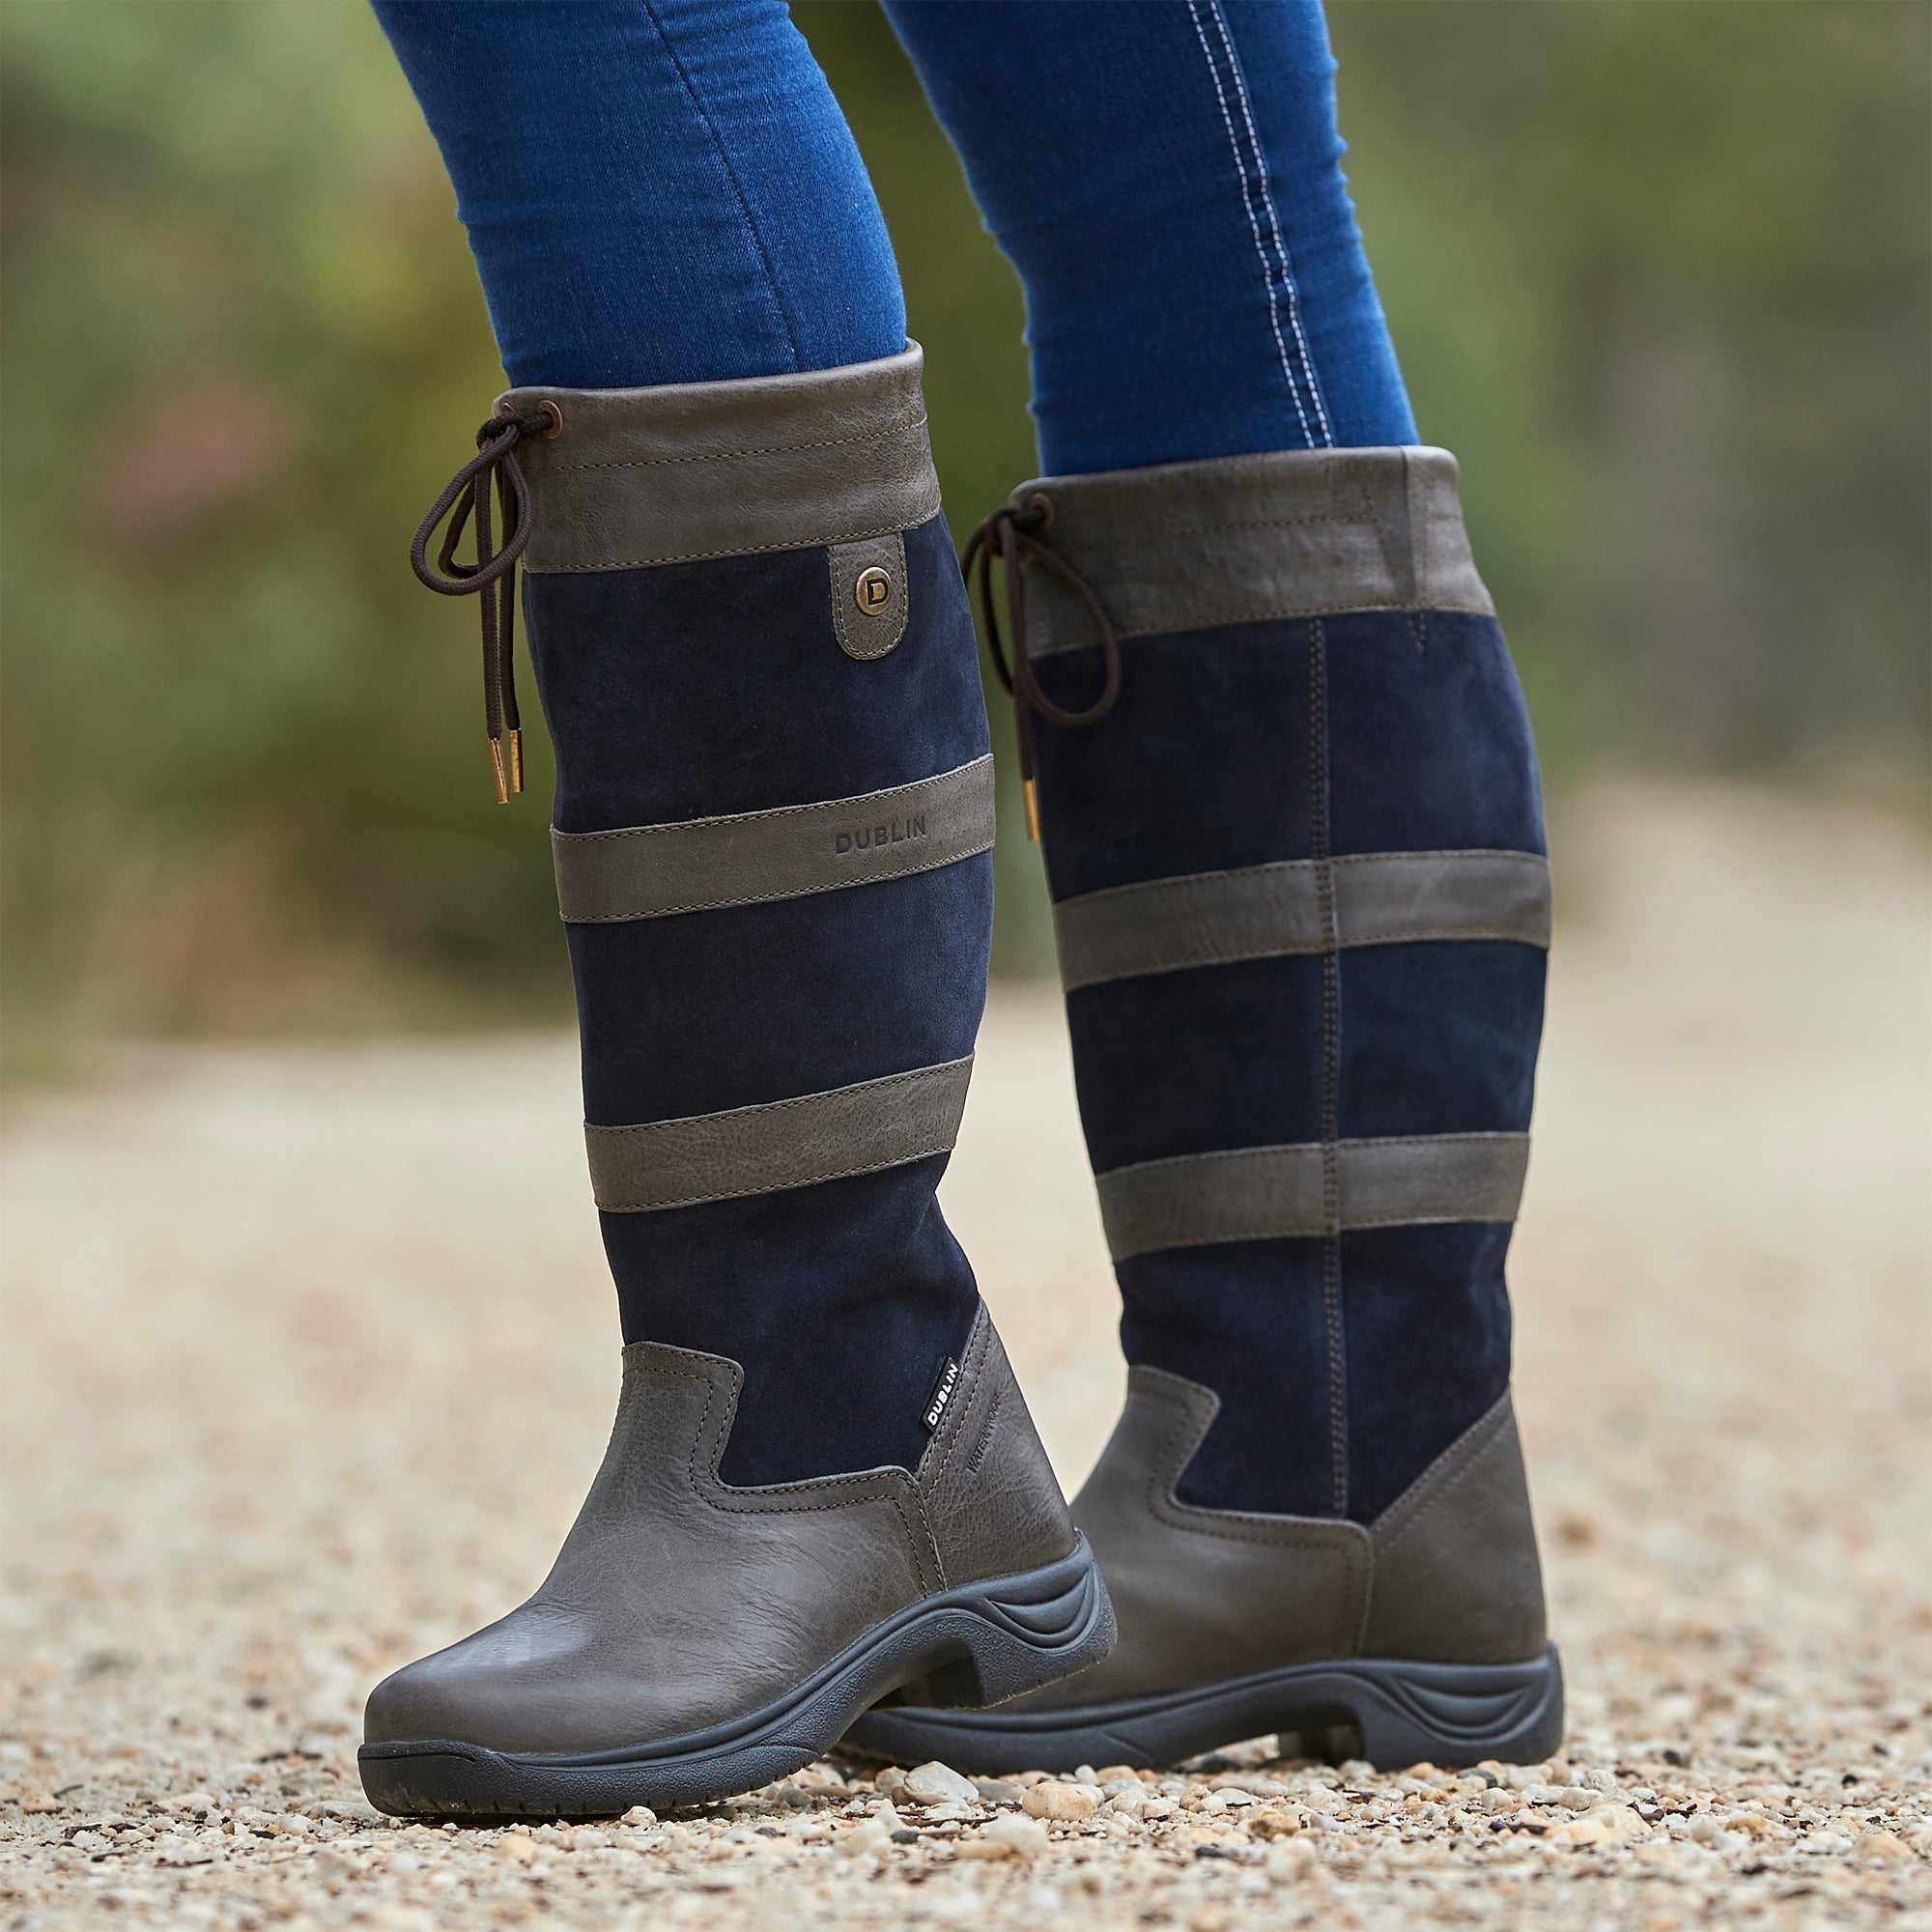 Dublin Ladies' River Tall Boots Waterproof Leather Rider Comfort System 